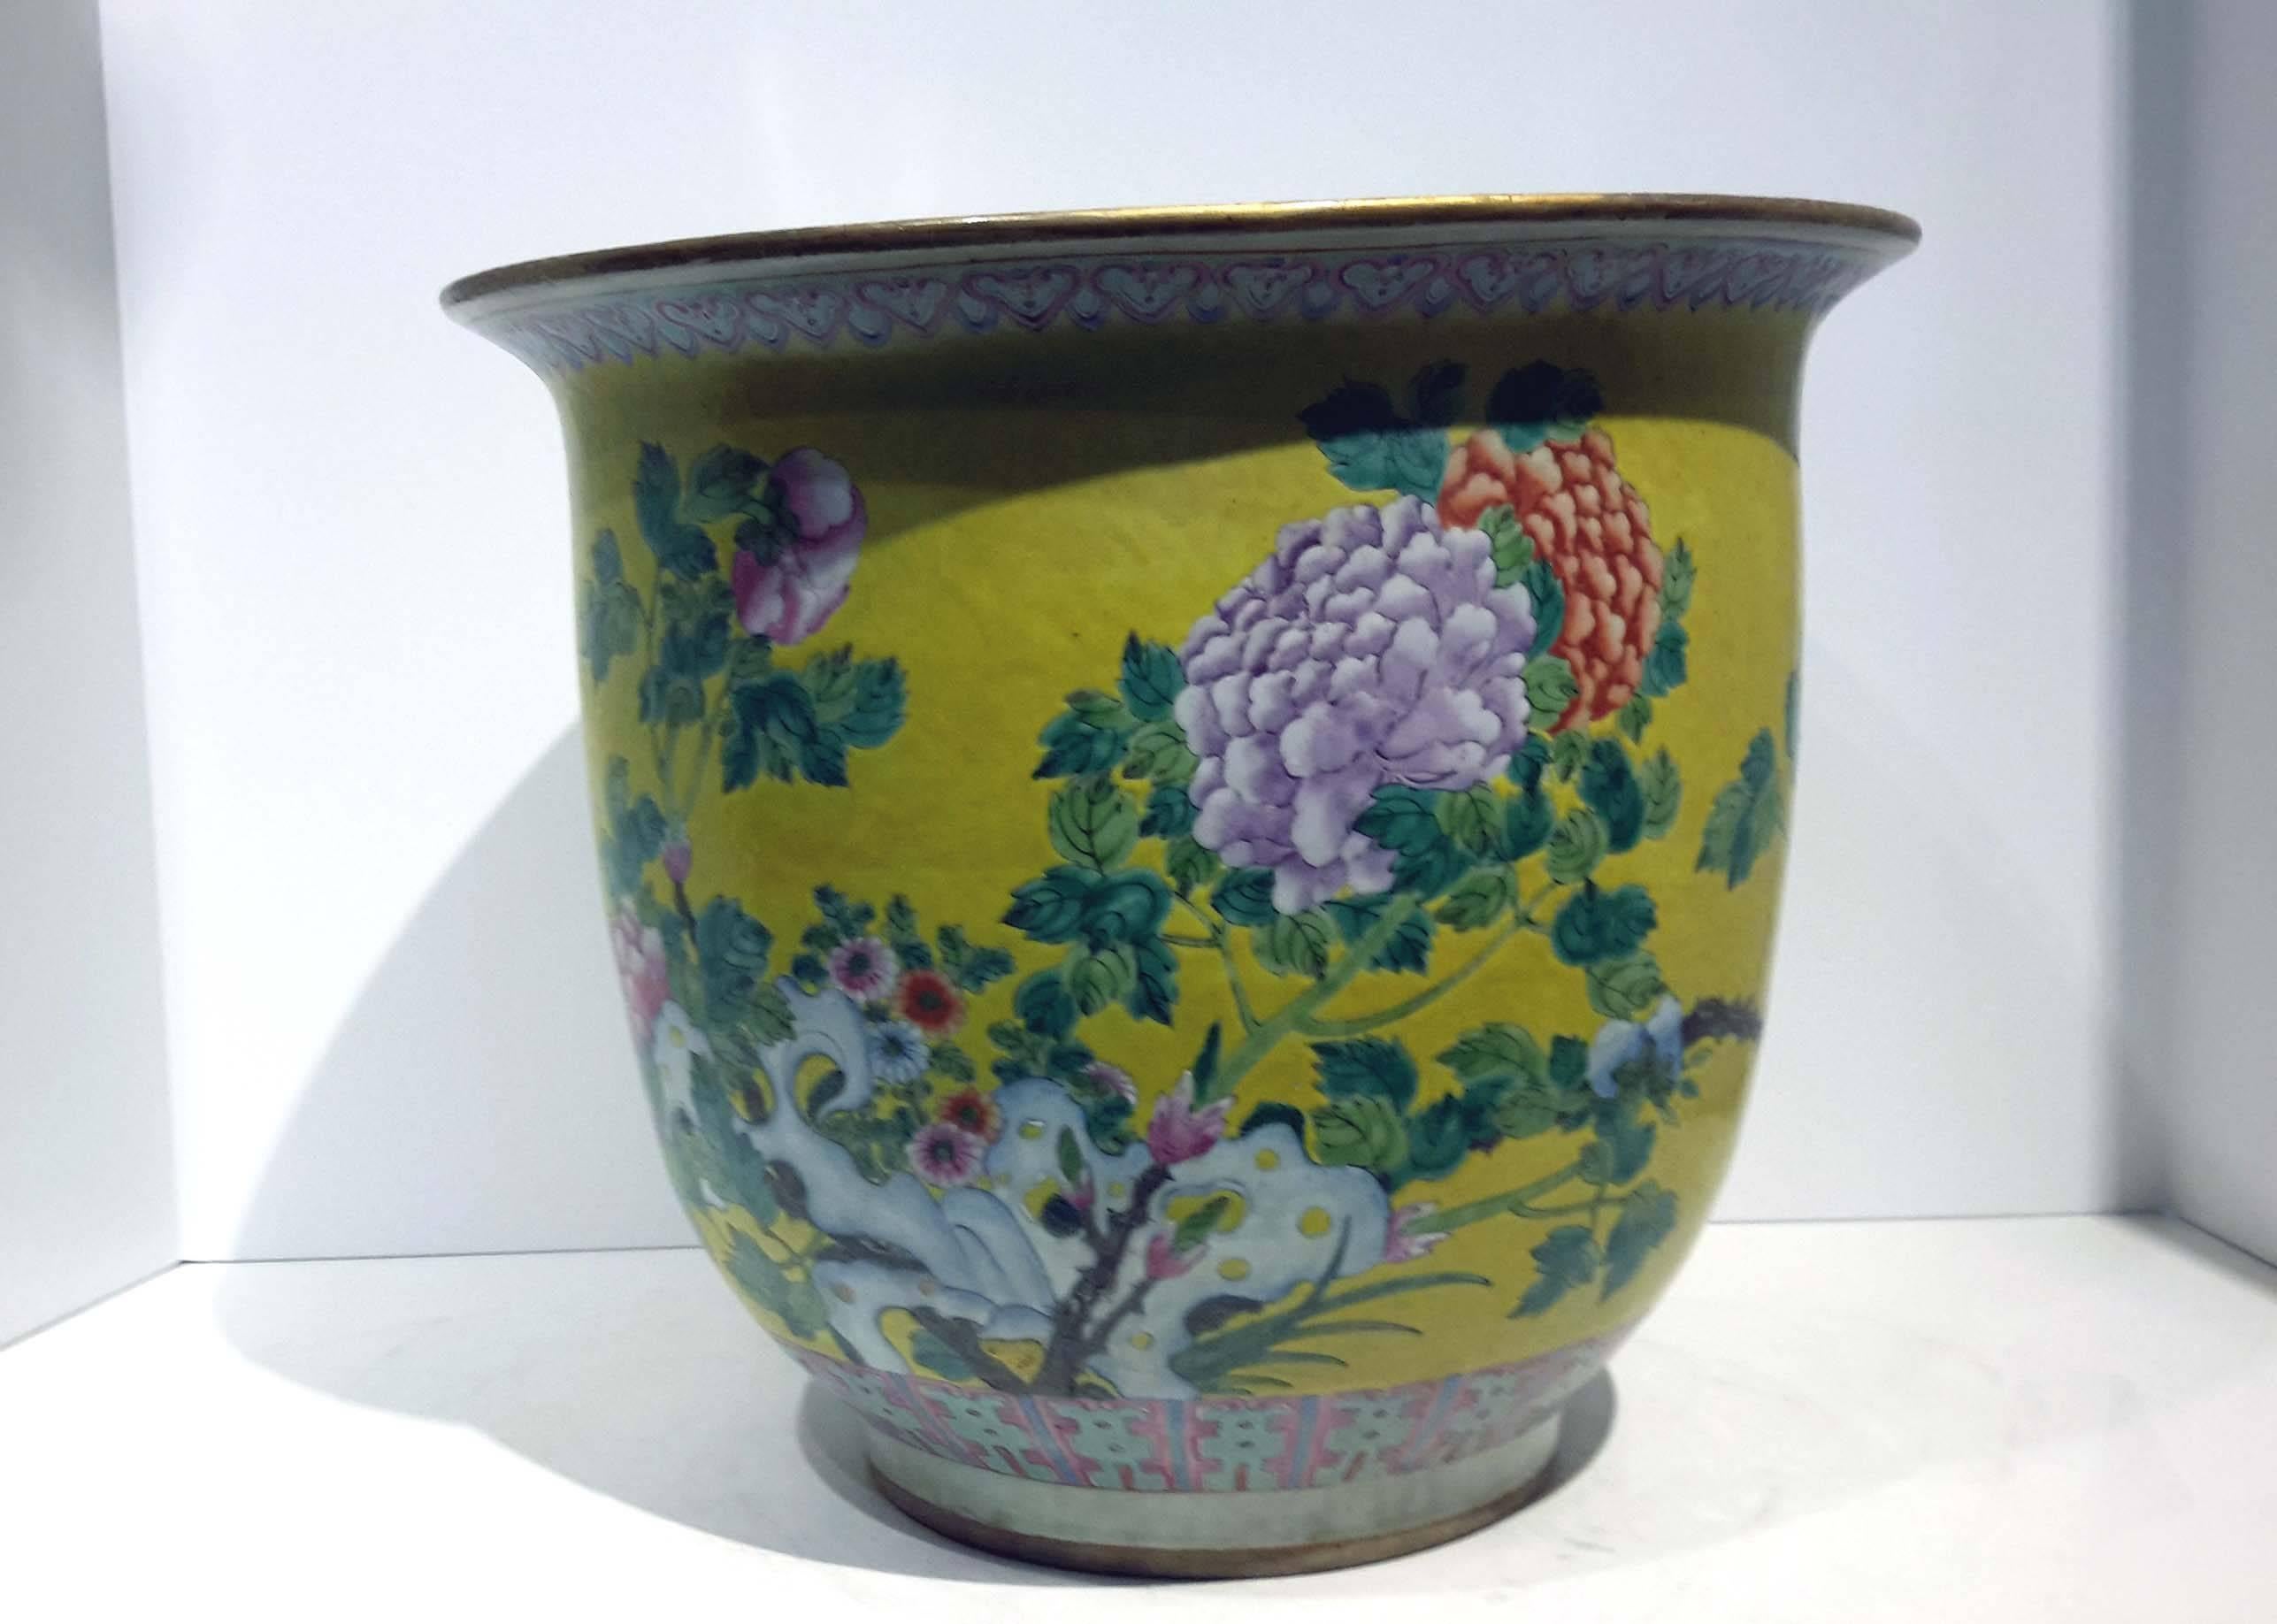 Beautifully hand painted and enameled Chinese porcelain planter. In a beautiful lemon yellow background.Depicting flowers and rocks.
The hole for rinse has been later plugged. In good condition now. There was professional restoration done to the